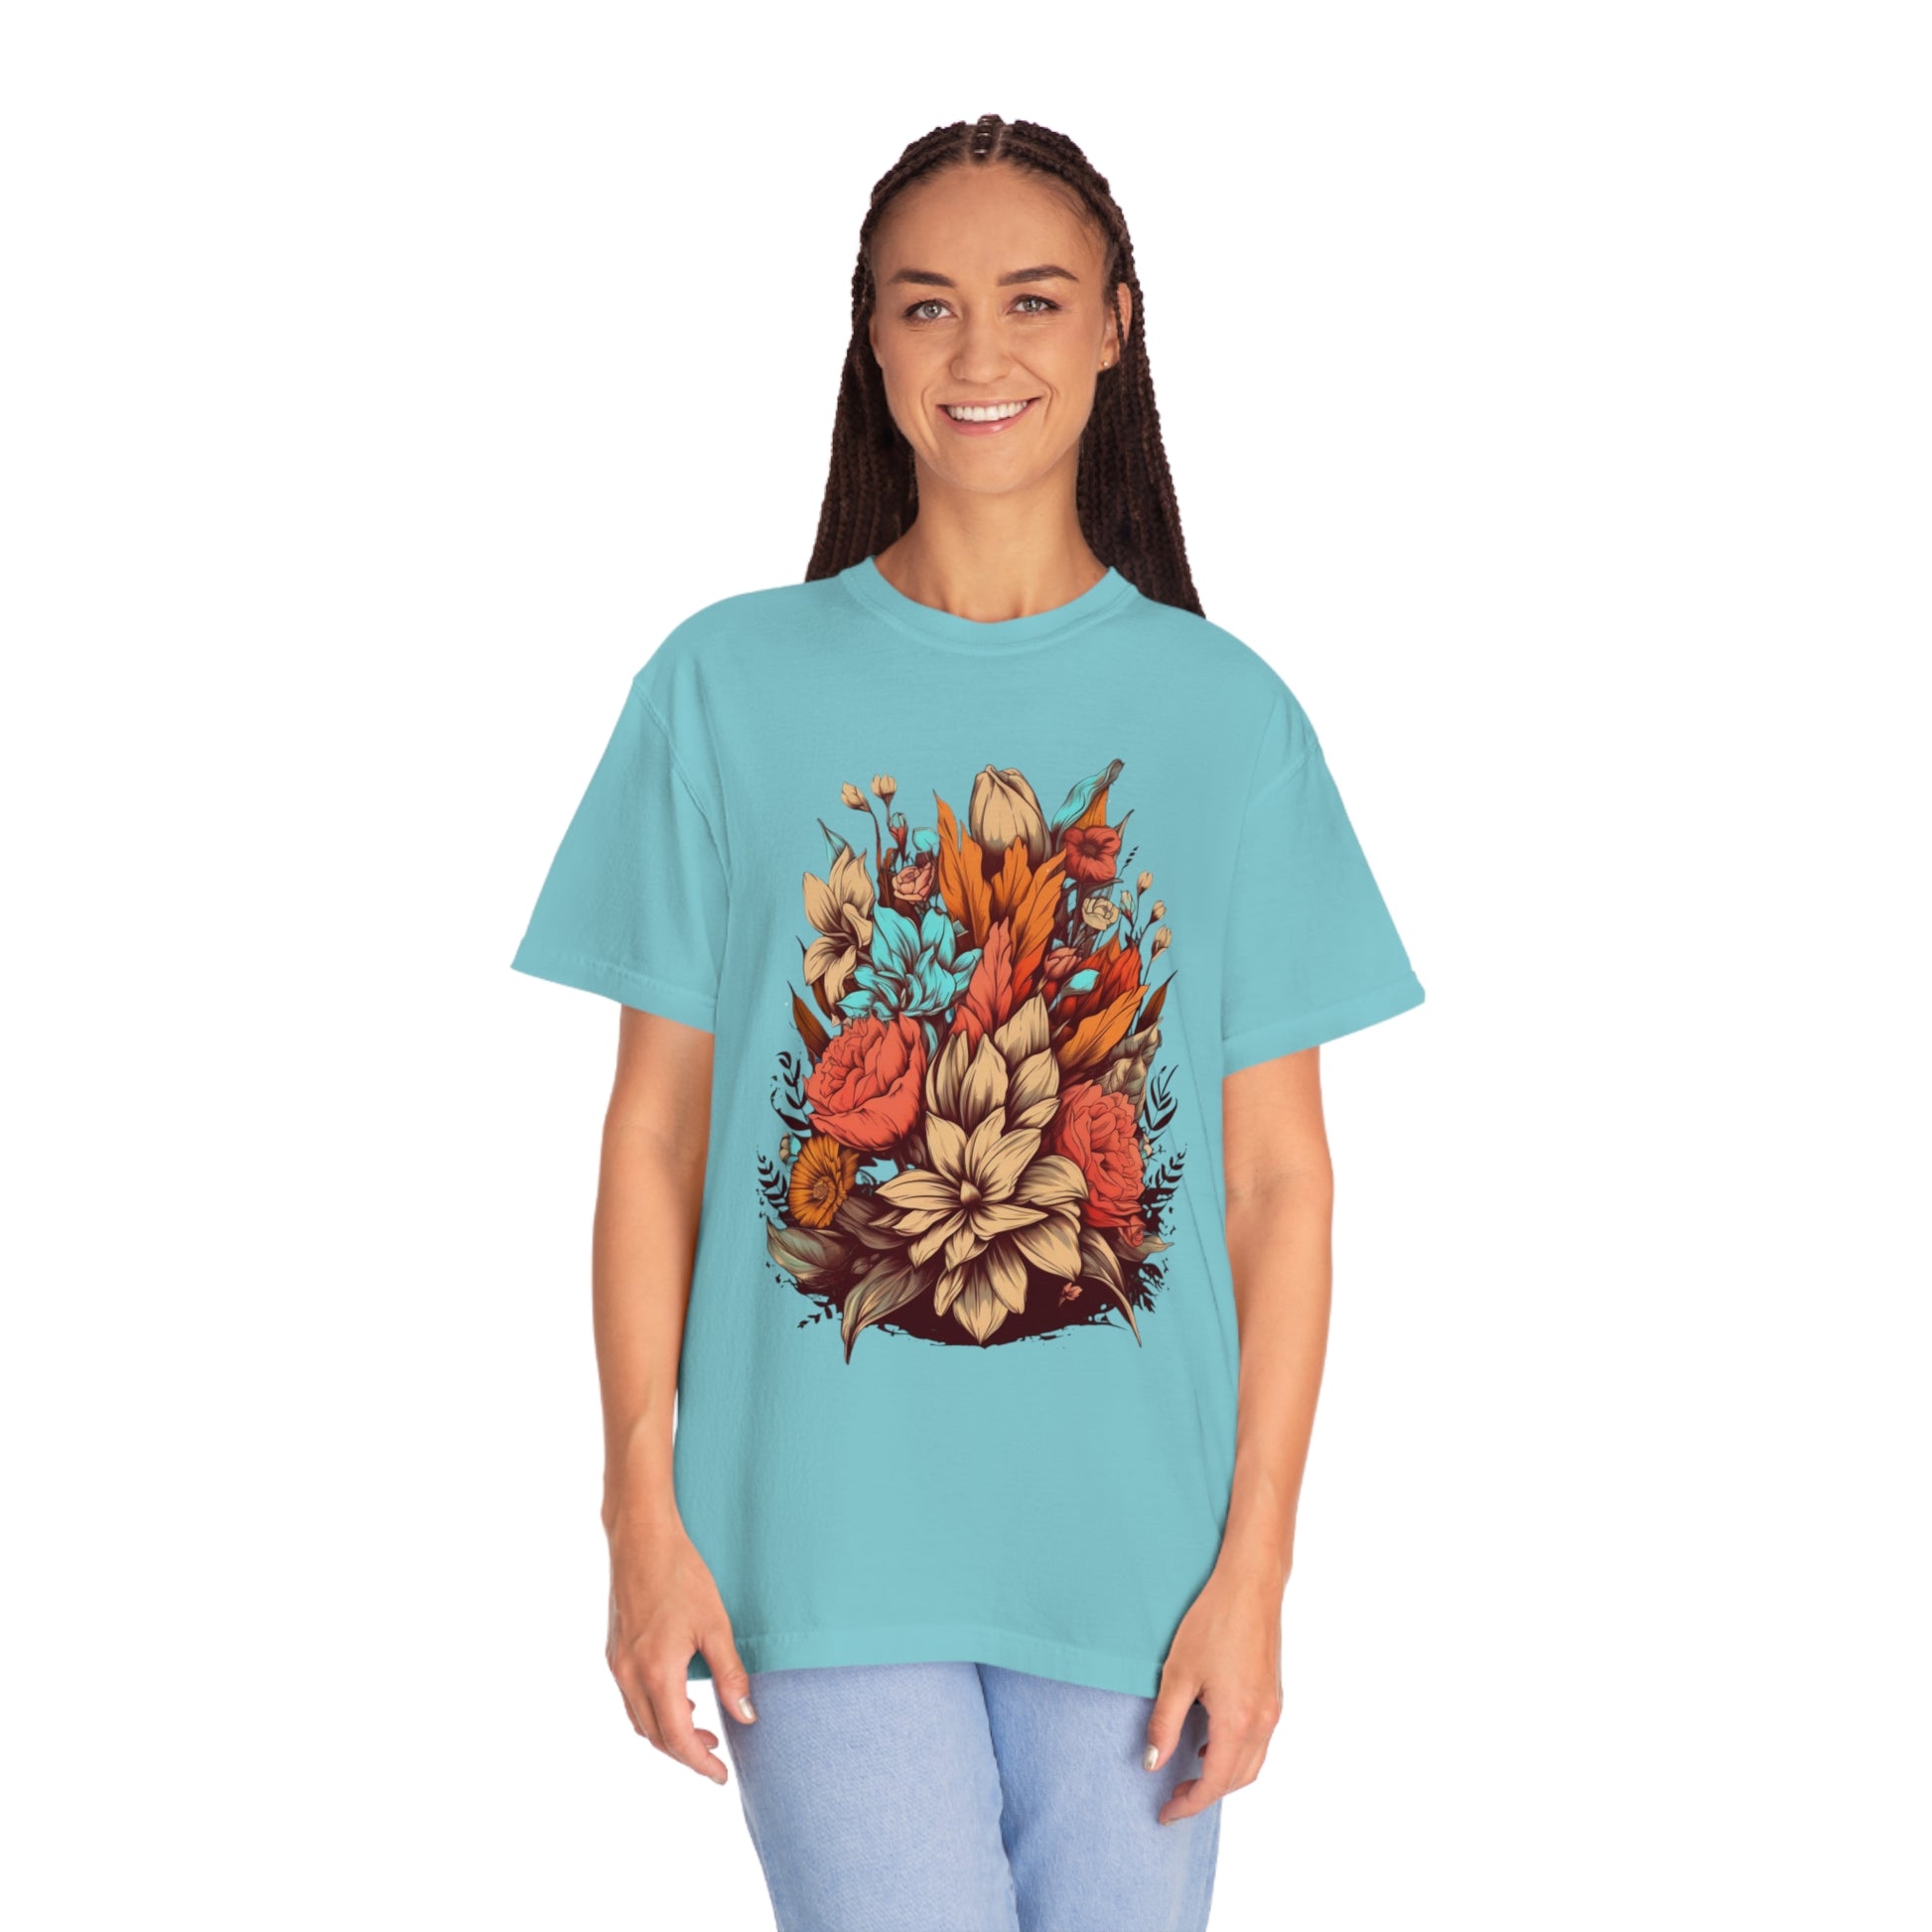 Boho Wildflowers Floral Nature Shirt | Garment Dyed Boho Tee for Nature Lovers T-Shirt Chalky Mint S 